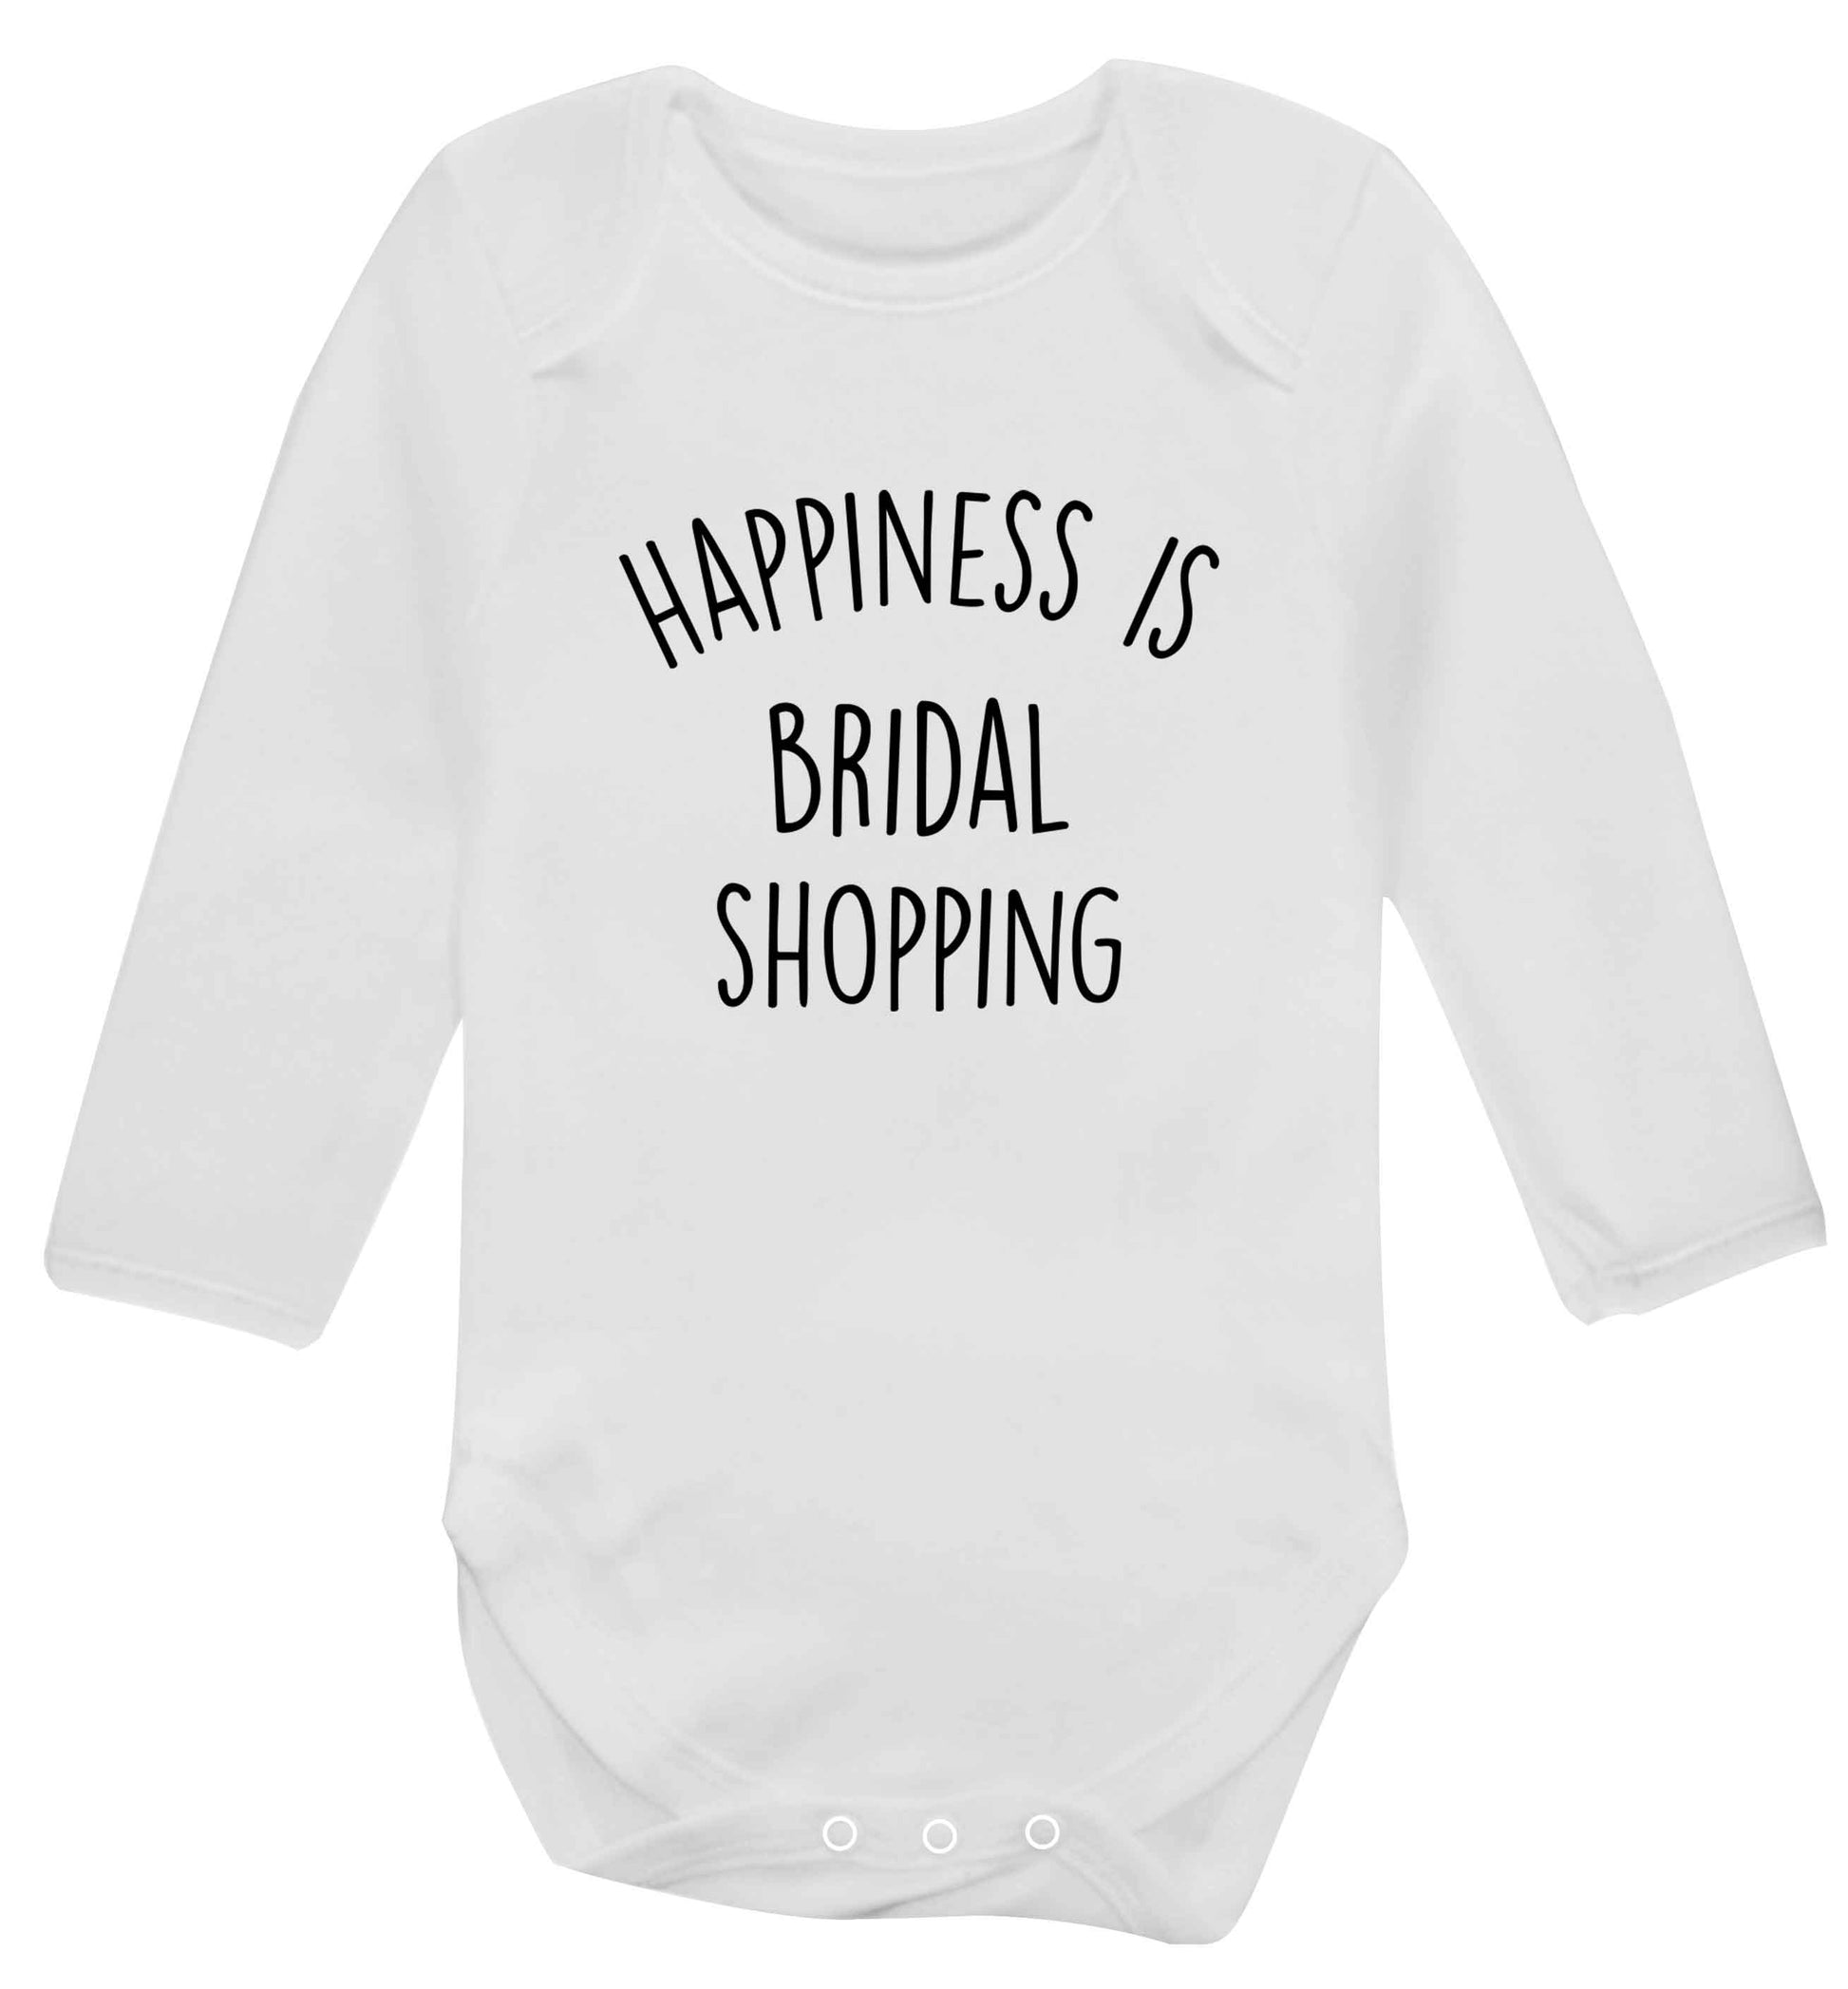 Happiness is bridal shopping baby vest long sleeved white 6-12 months